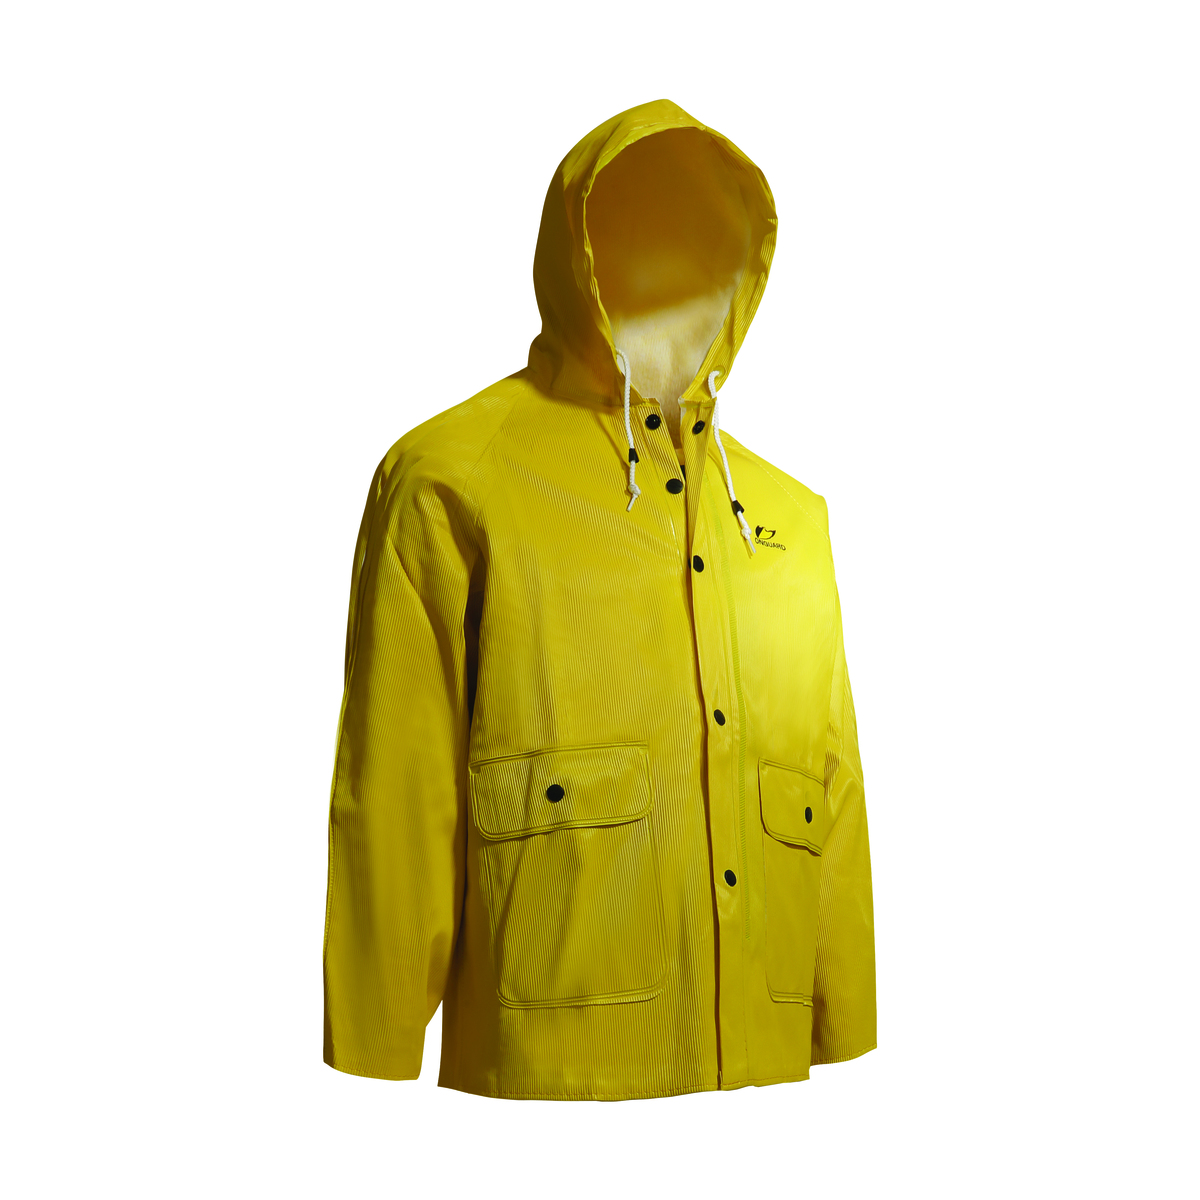 Dunlop® Protective Footwear Large Yellow Webtex .65 mm Polyester/PVC Rain Jacket With Attached Hood